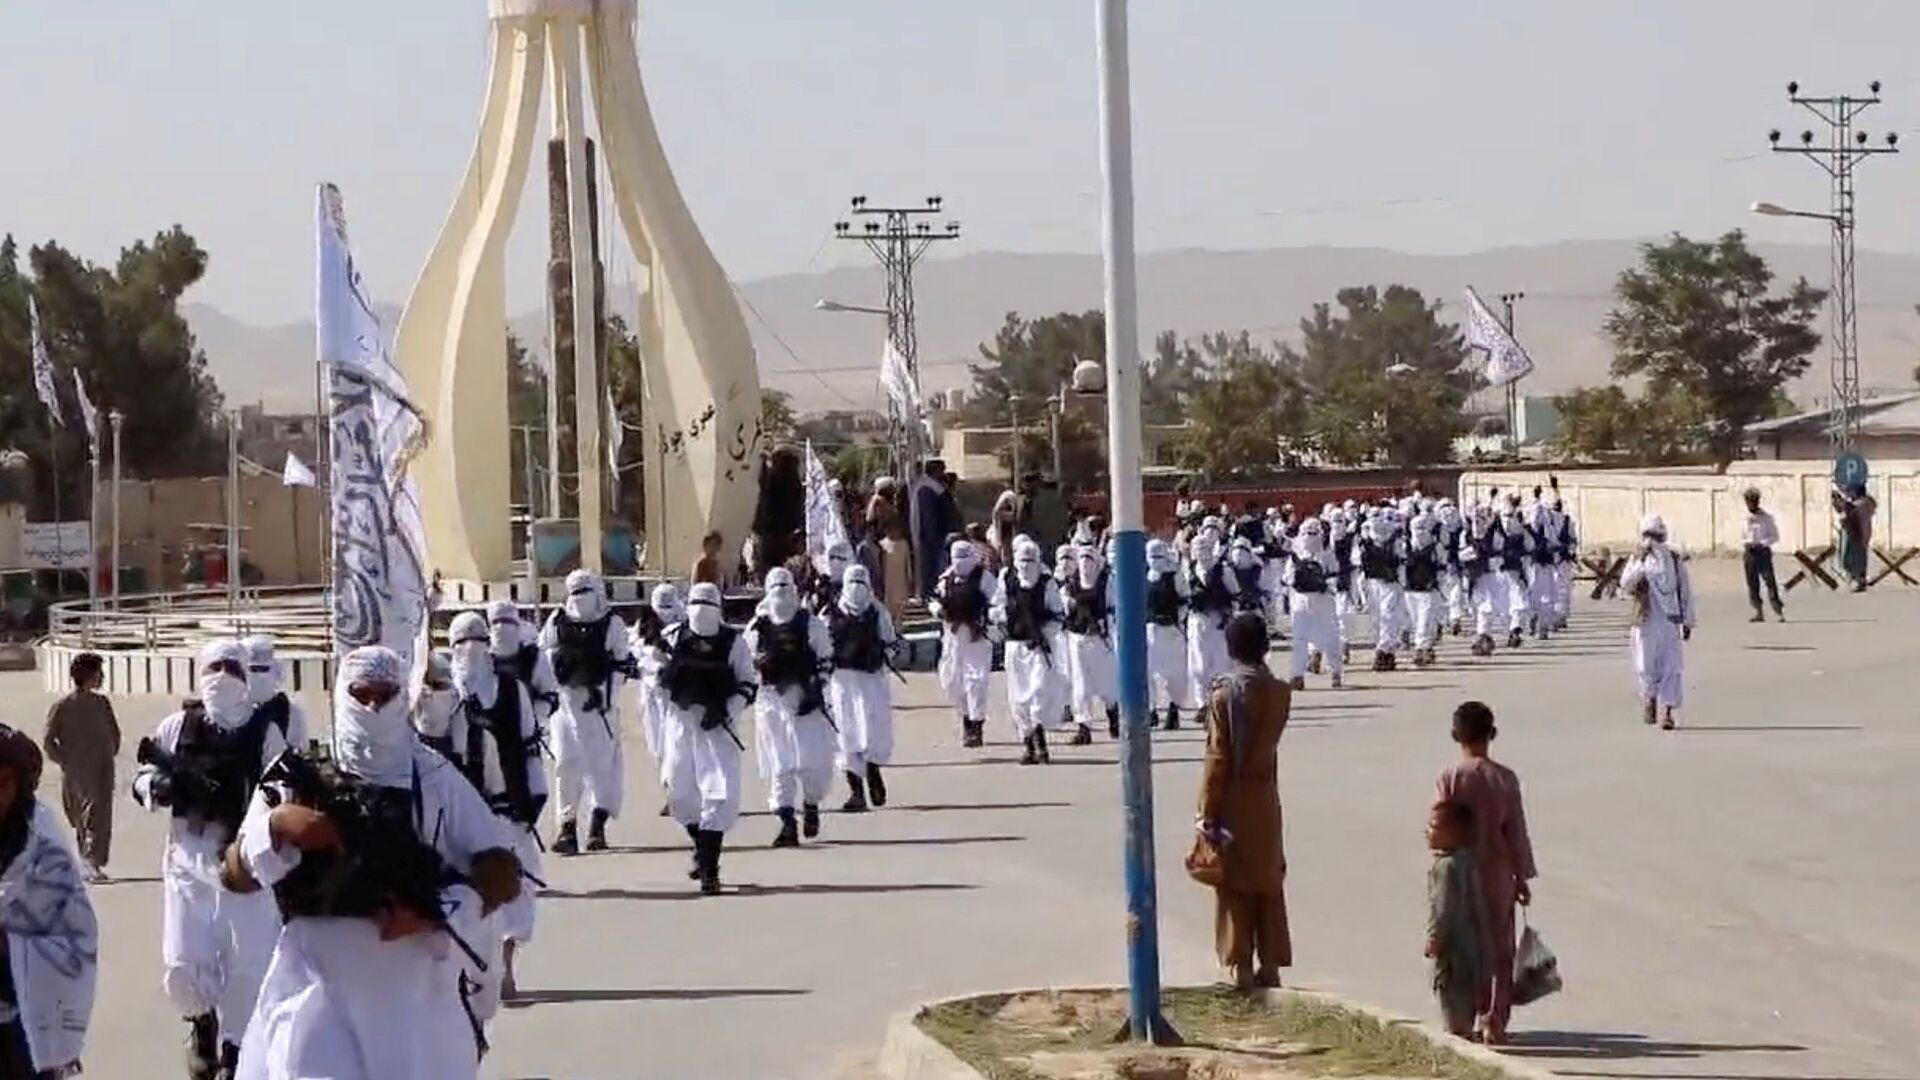 Taliban fighters march in uniforms on the street in Qalat, Zabul Province, Afghanistan, in this still image taken from social media video uploaded August 19, 2021 and obtained by REUTERS - Sputnik International, 1920, 08.09.2021